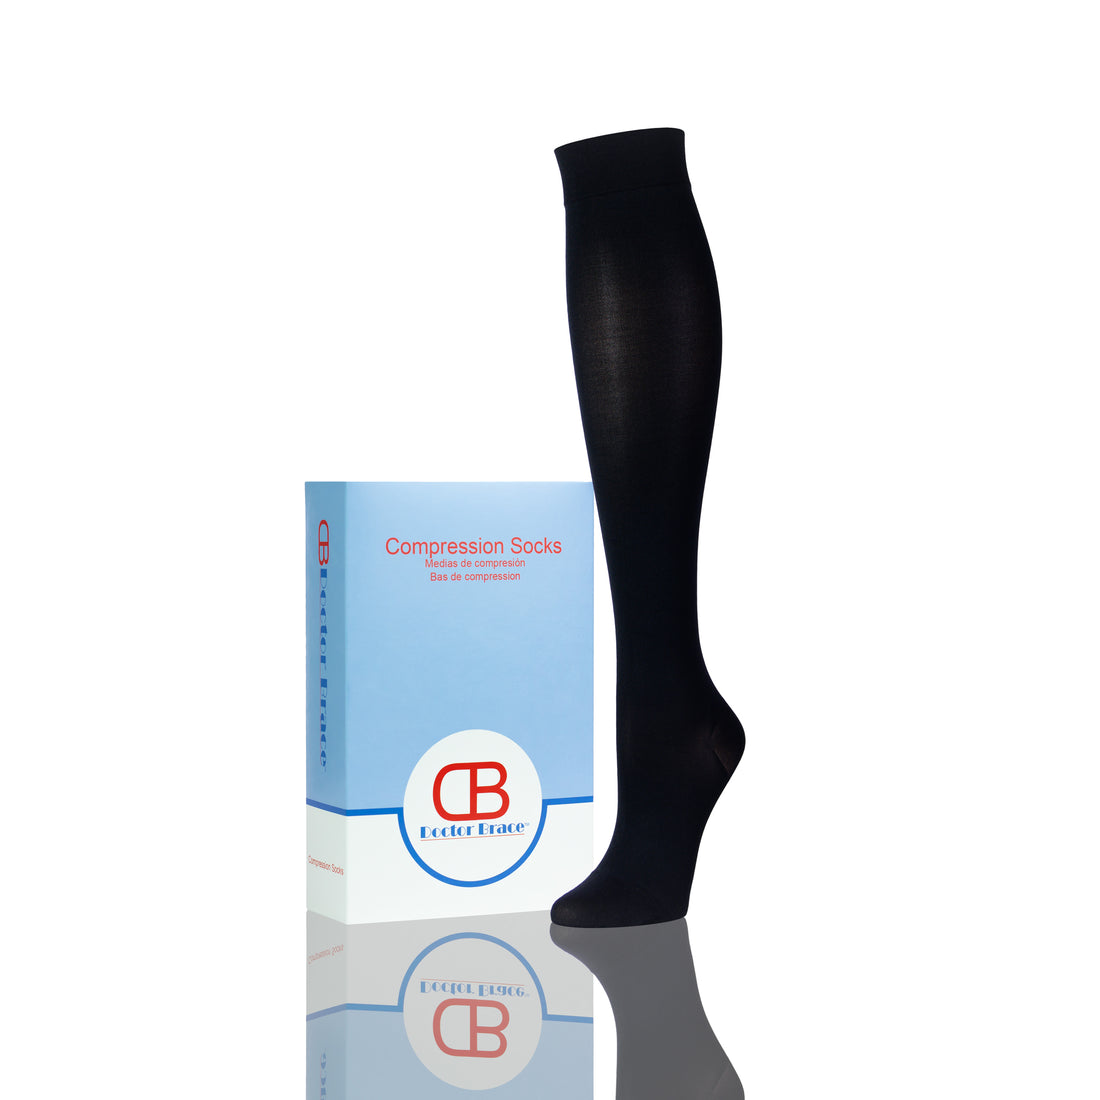 Compression Socks for Women and men 20-30 mmhg, Knee High Graduated  Compression Stockings, Opaque, Open Toe, Unisex, Black, Medium